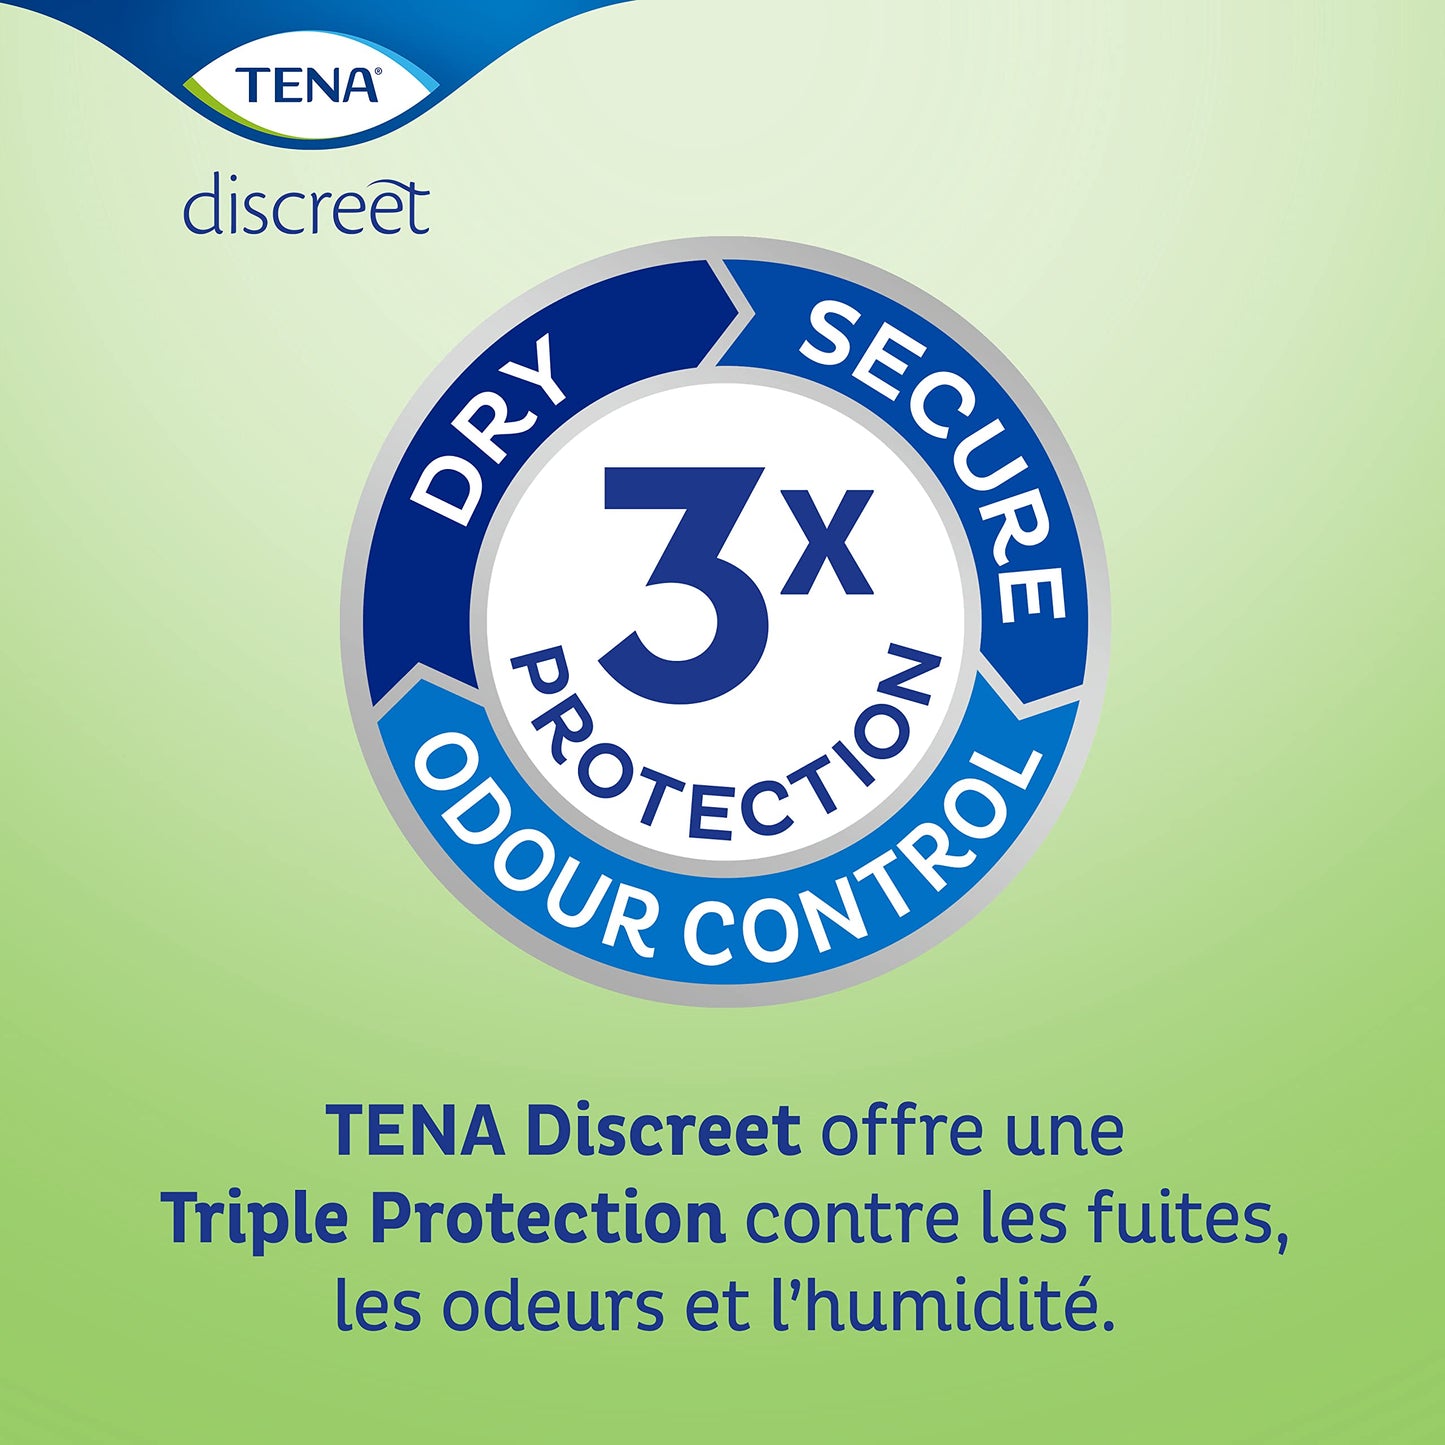 TENA Discreet Mini, 120 Incontinence Pads (20 x 6 packs) Individually Wrapped, for Women with Light to Medium Bladder Weakness, Incontinence and Unpredictable Drips